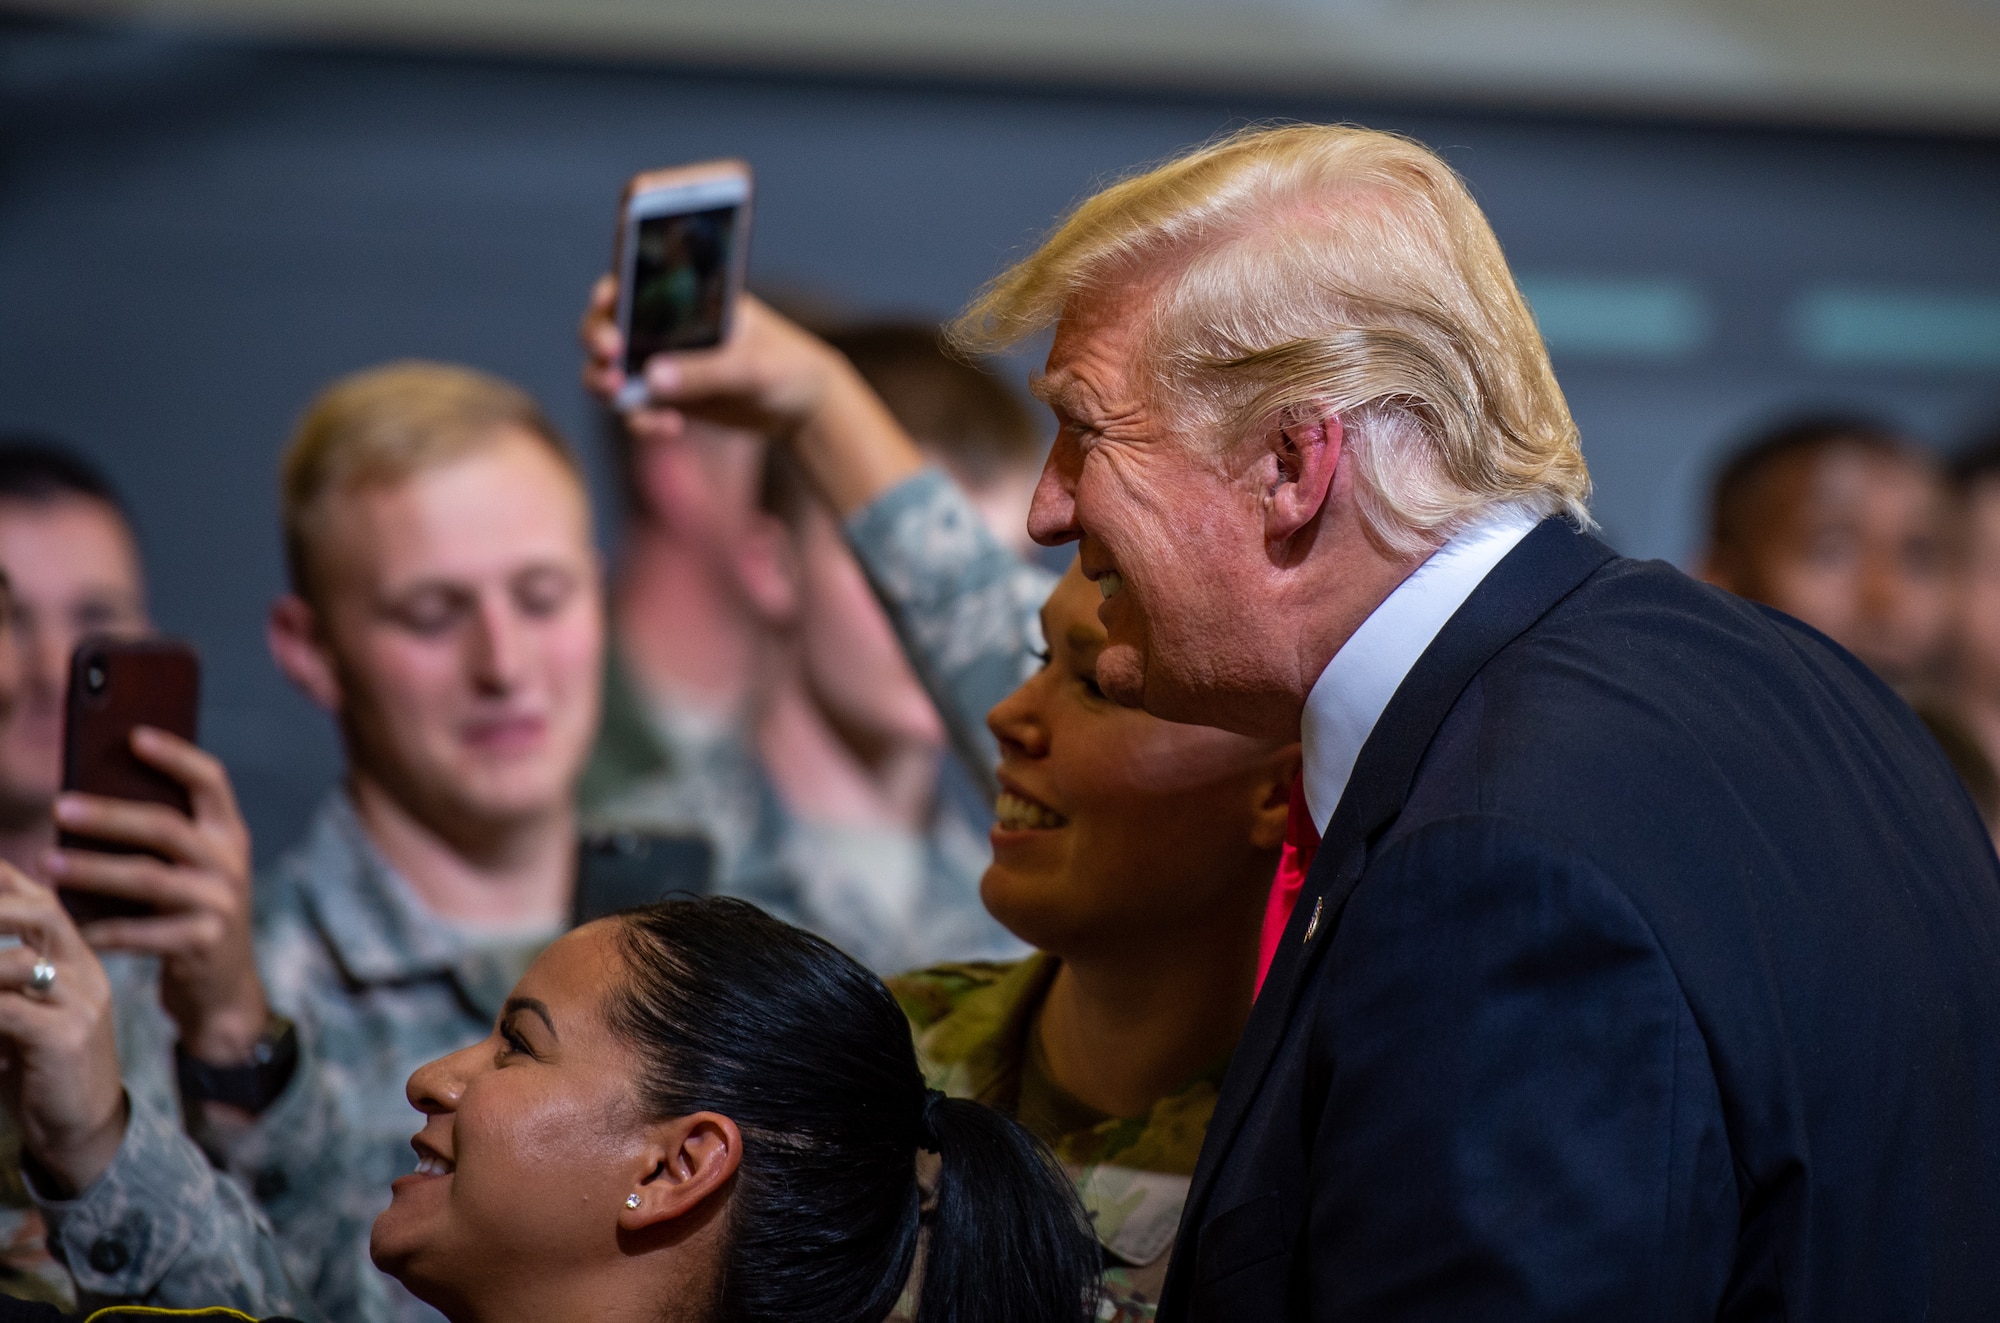 President Donald J. Trump poses for a photo with Airmen during his visit to Luke Air Force Base, Ariz., Oct. 19, 2018. Trump acknowledged and emphasized the importance of Arizona’s military presence, including Luke’s role in building the future of airpower. (U.S. Air Force photo by Senior Airman Alexander Cook)